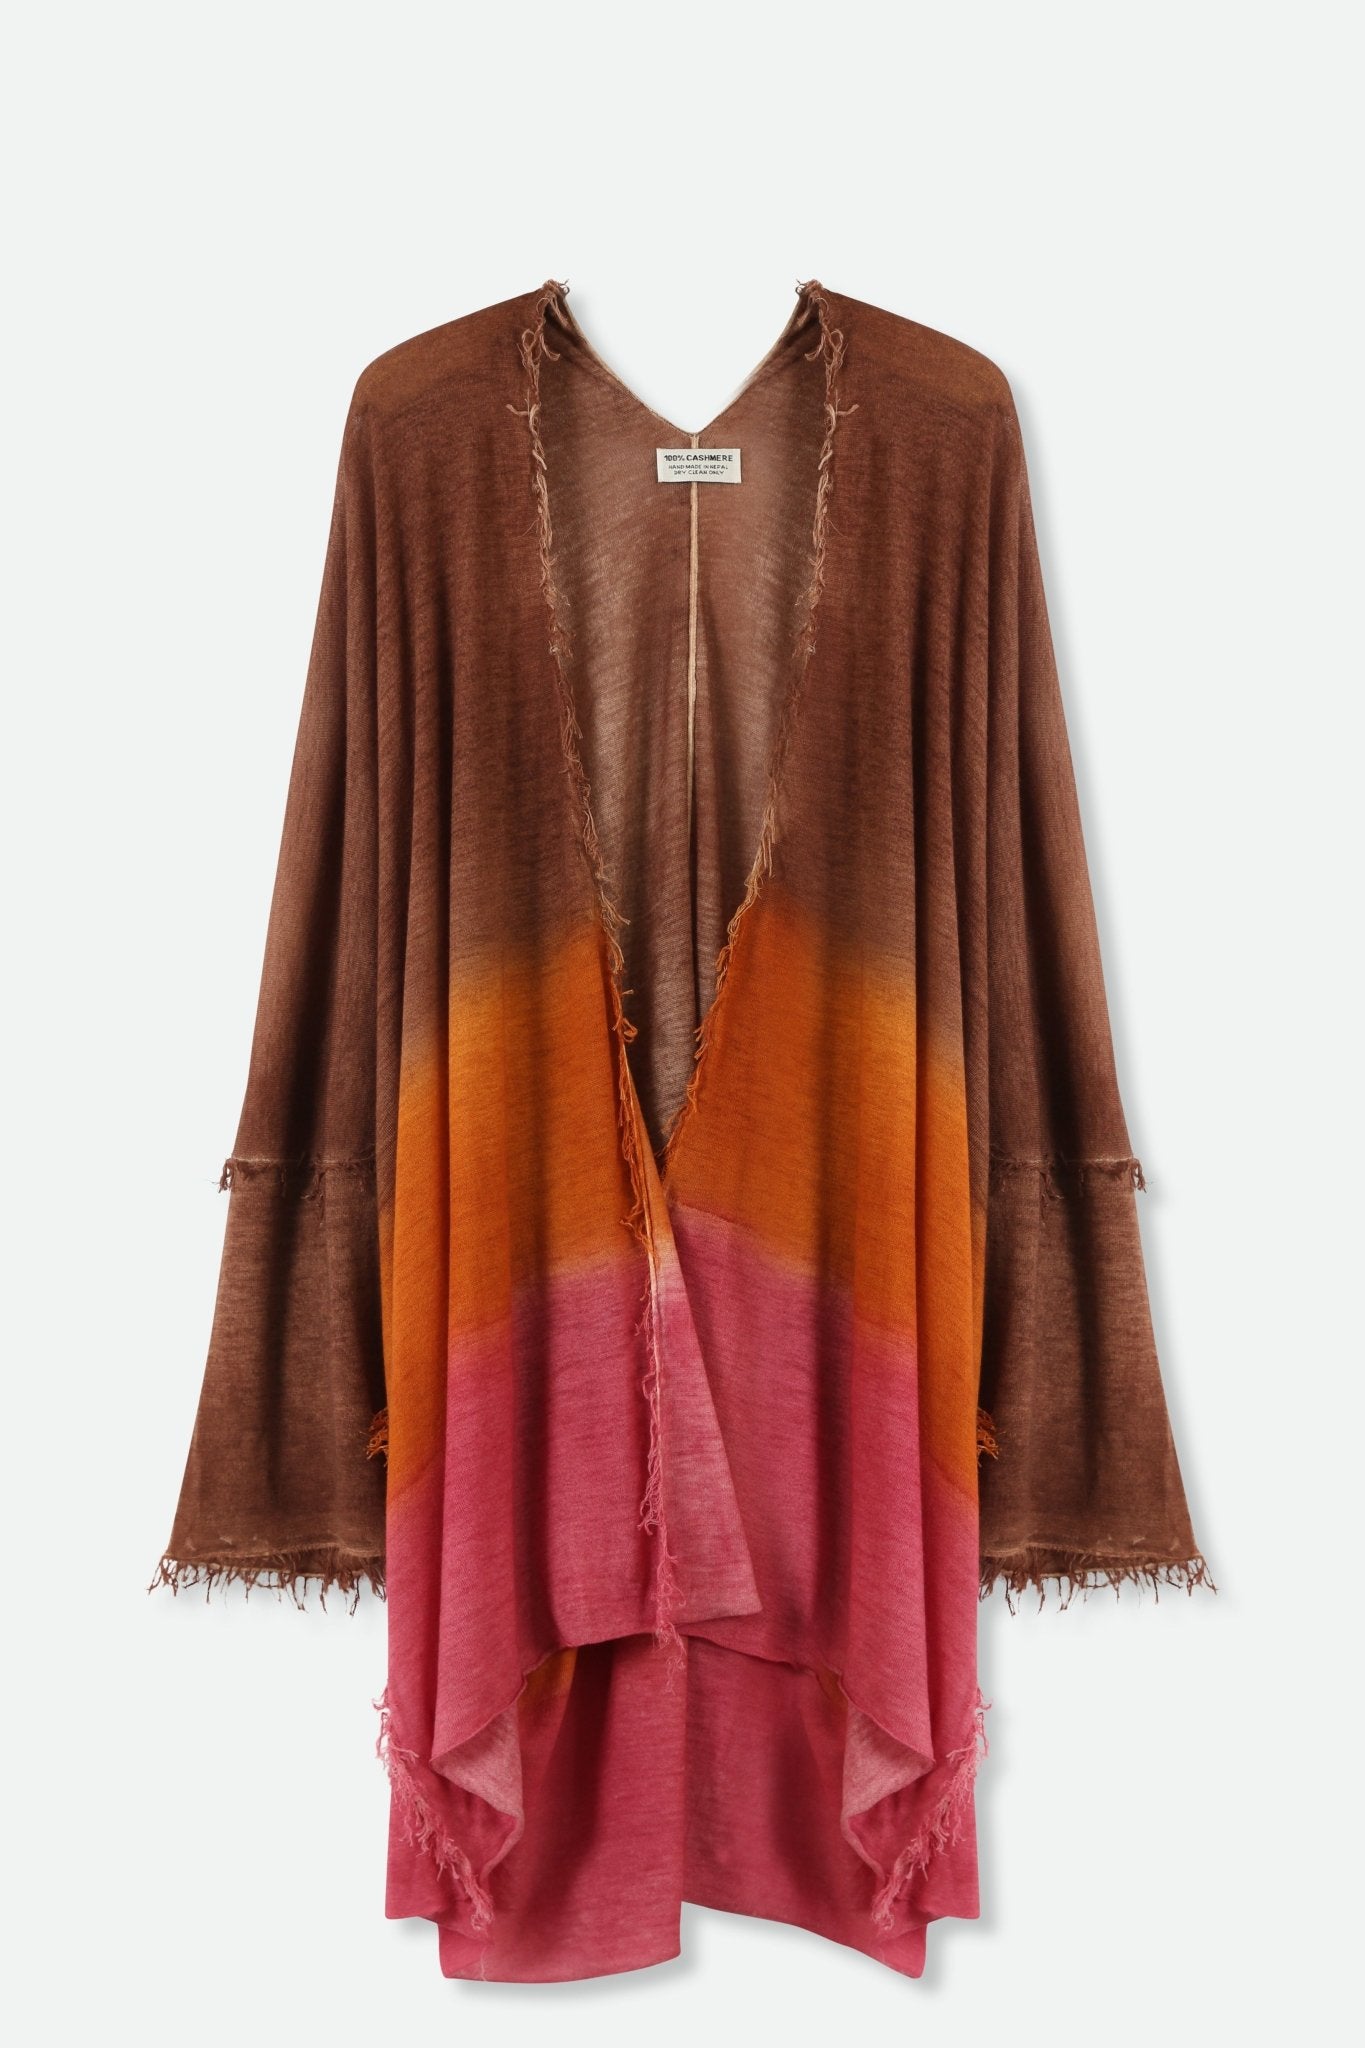 CHEZ CARDIGAN IN HAND-DYED EXTRA-FINE CASHMERE DESERT SUNSET - Jarbo